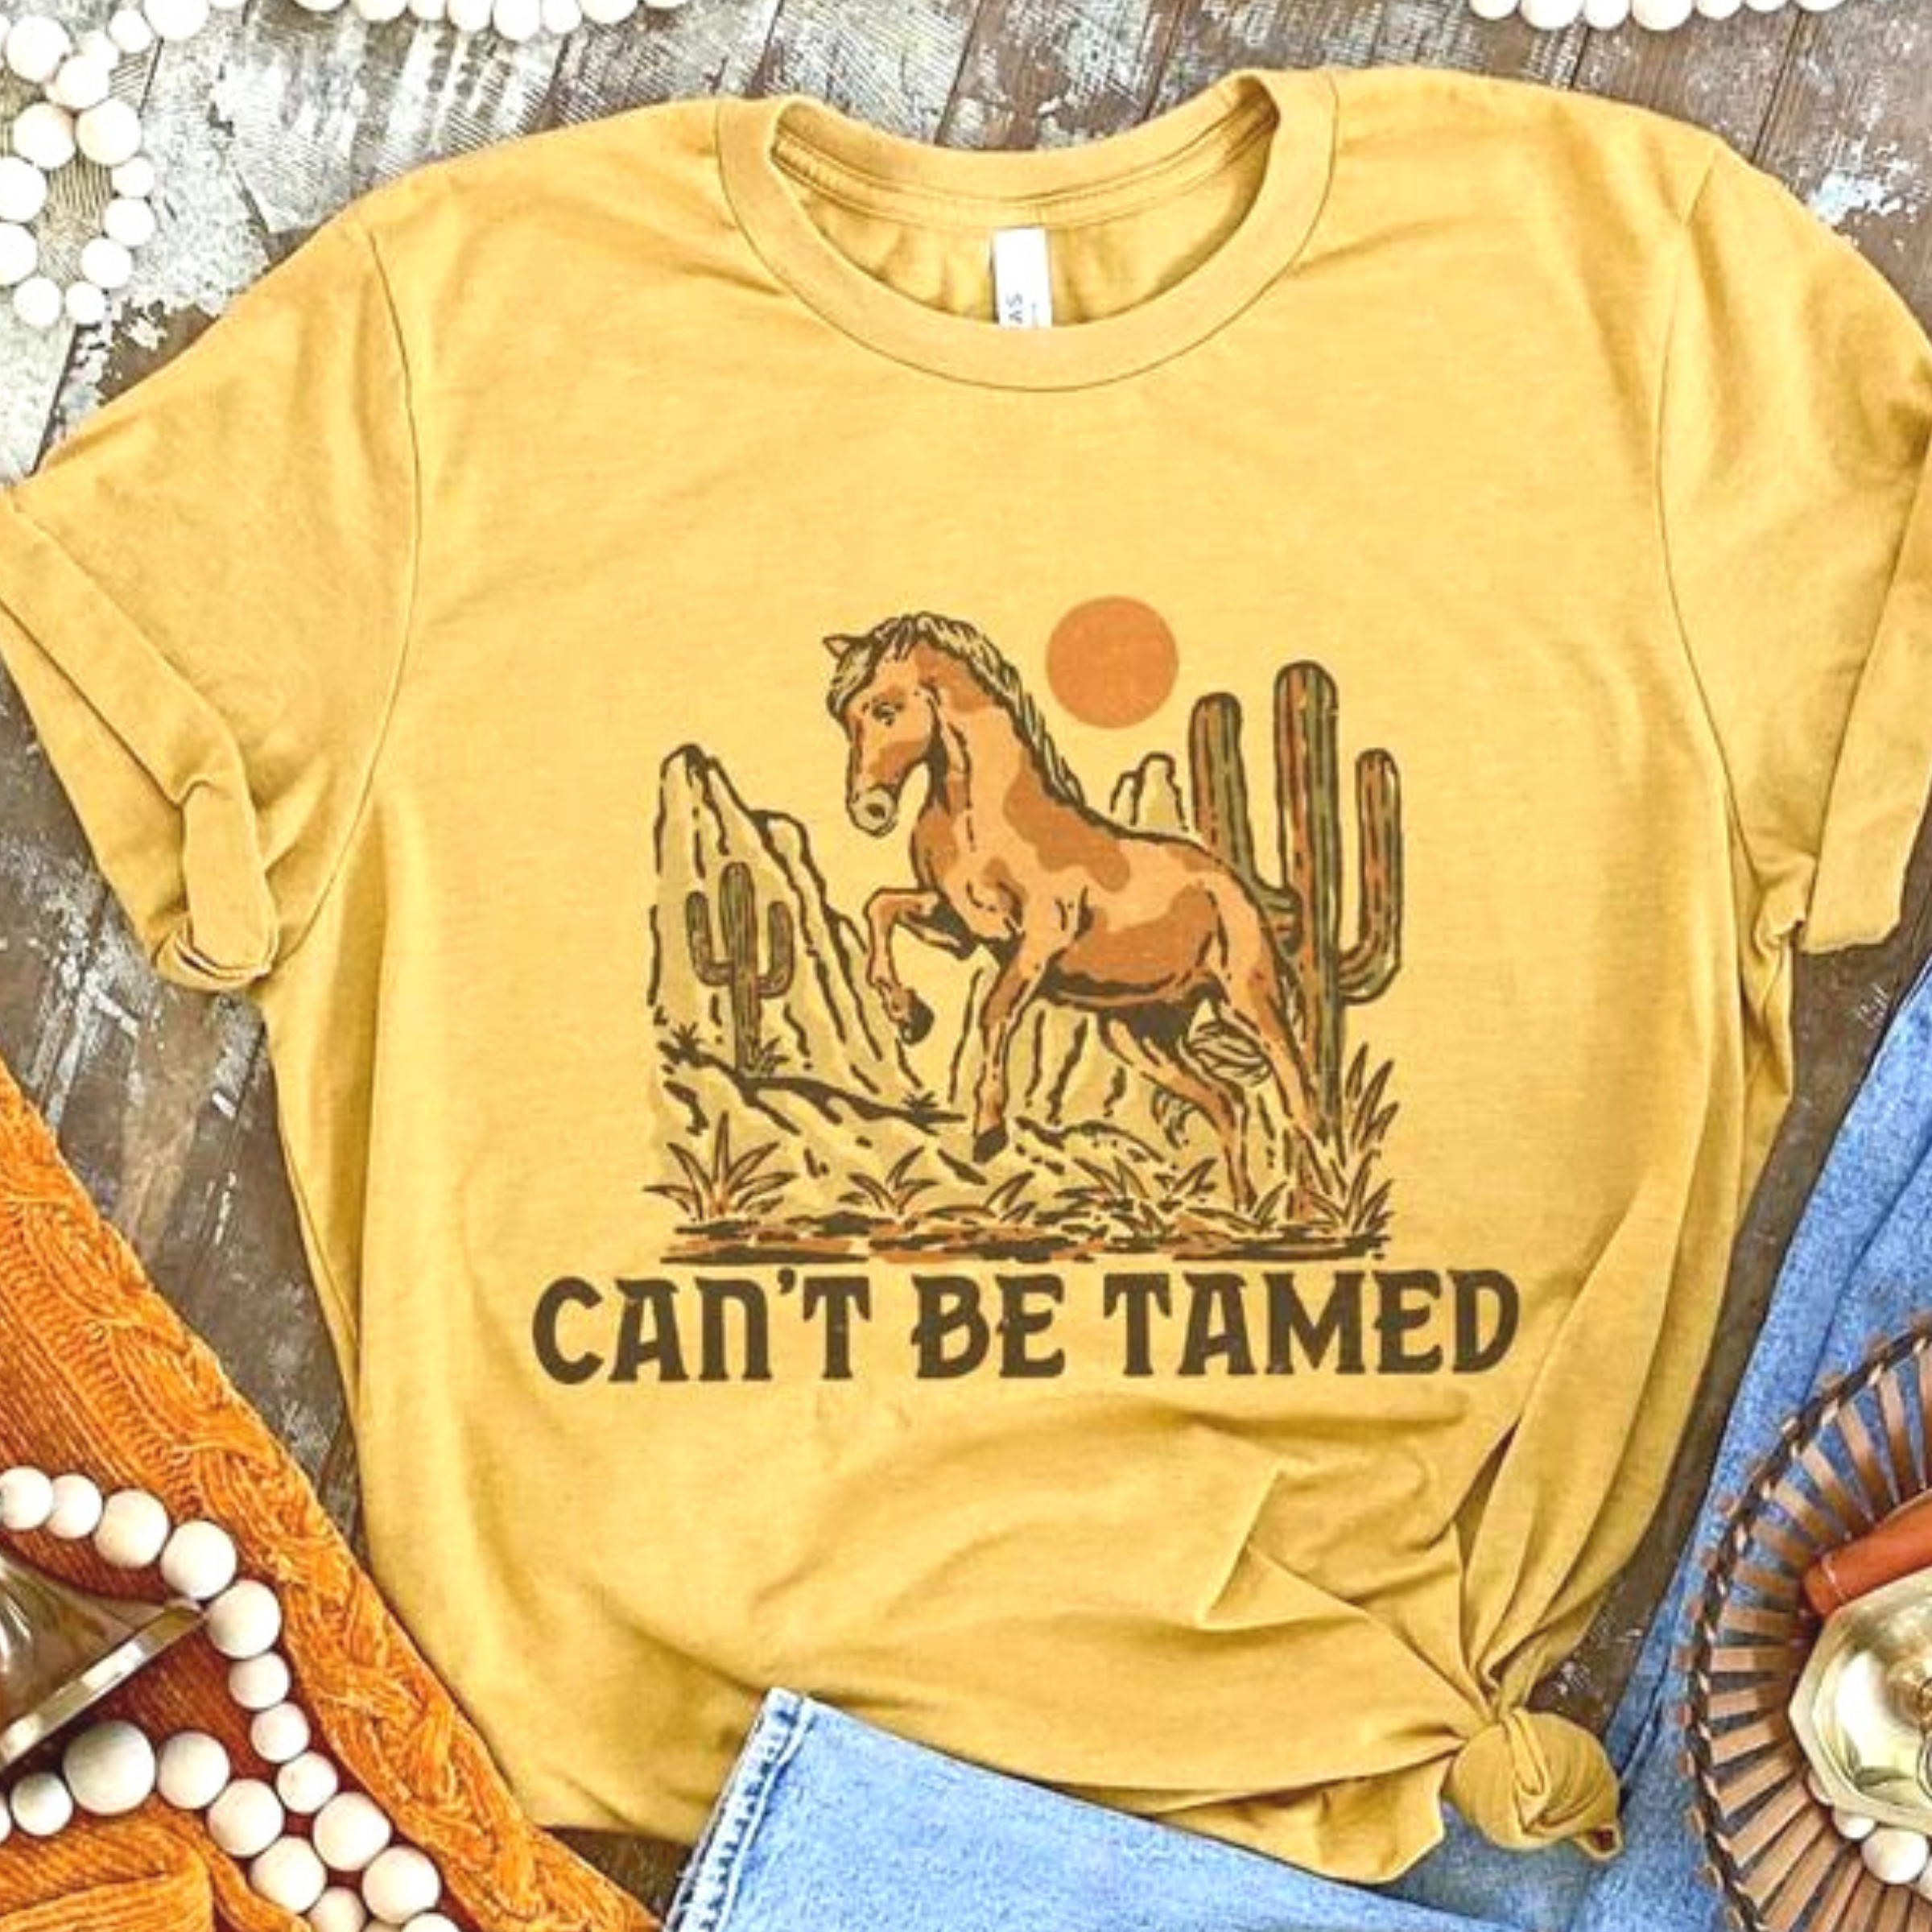 Online Exclusive | Can't Be Tamed Short Sleeve Graphic Tee in Mustard Yellow - Giddy Up Glamour Boutique